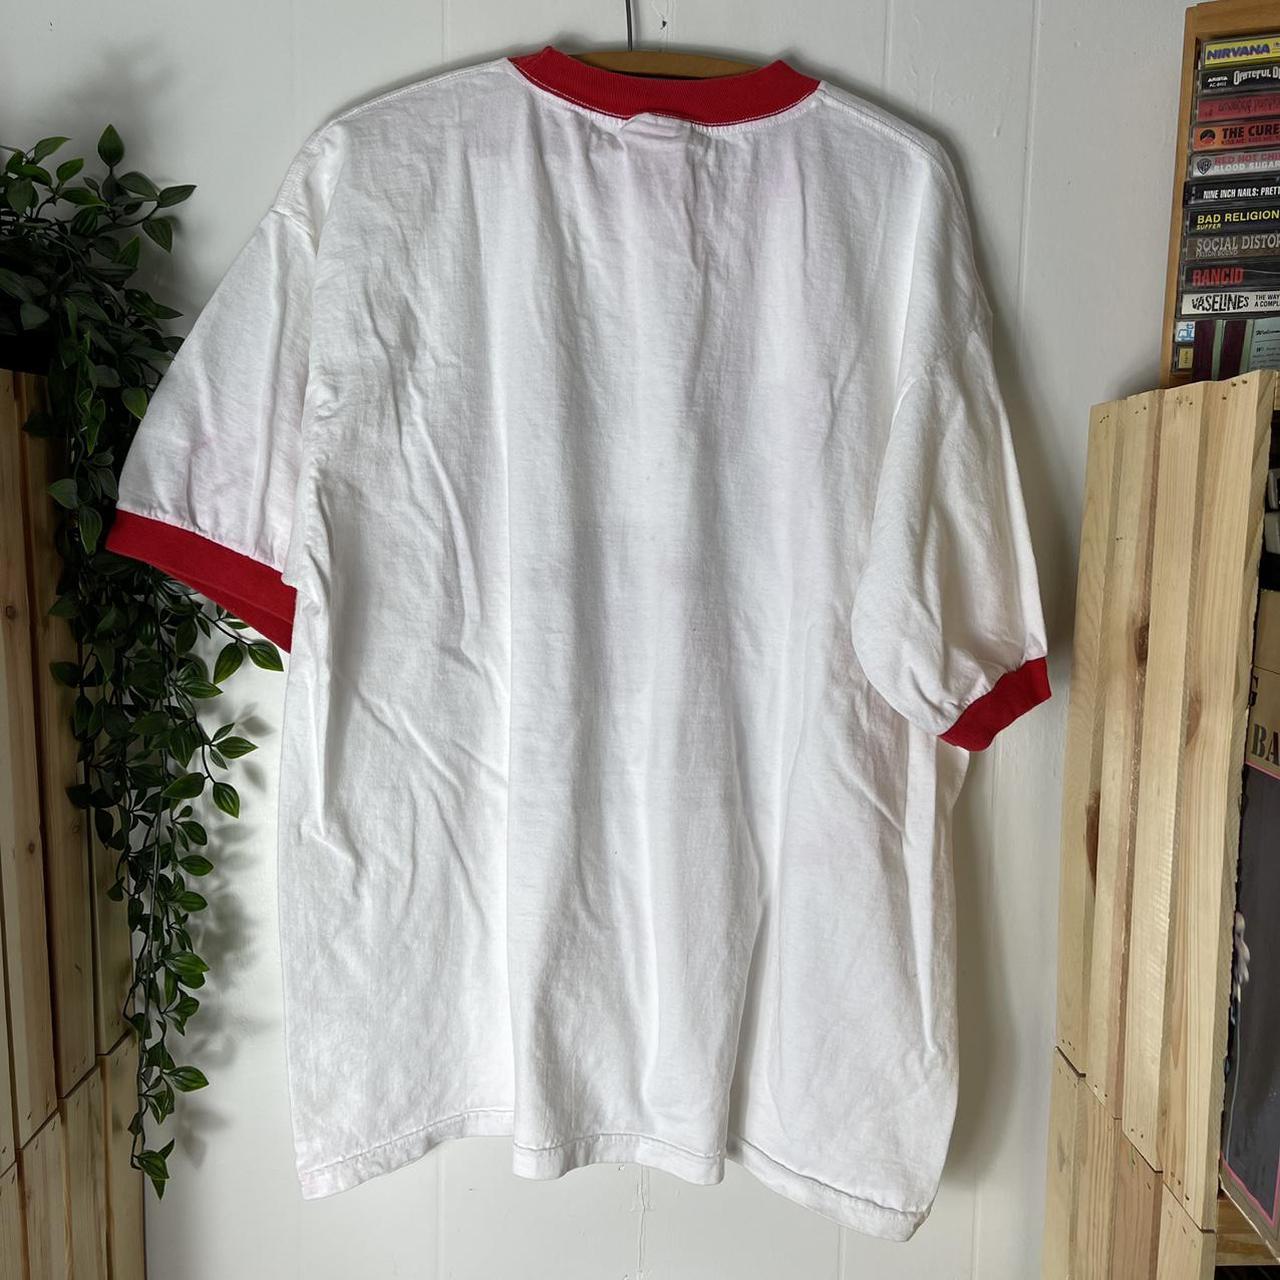 Lee Men's Red and White T-shirt (2)